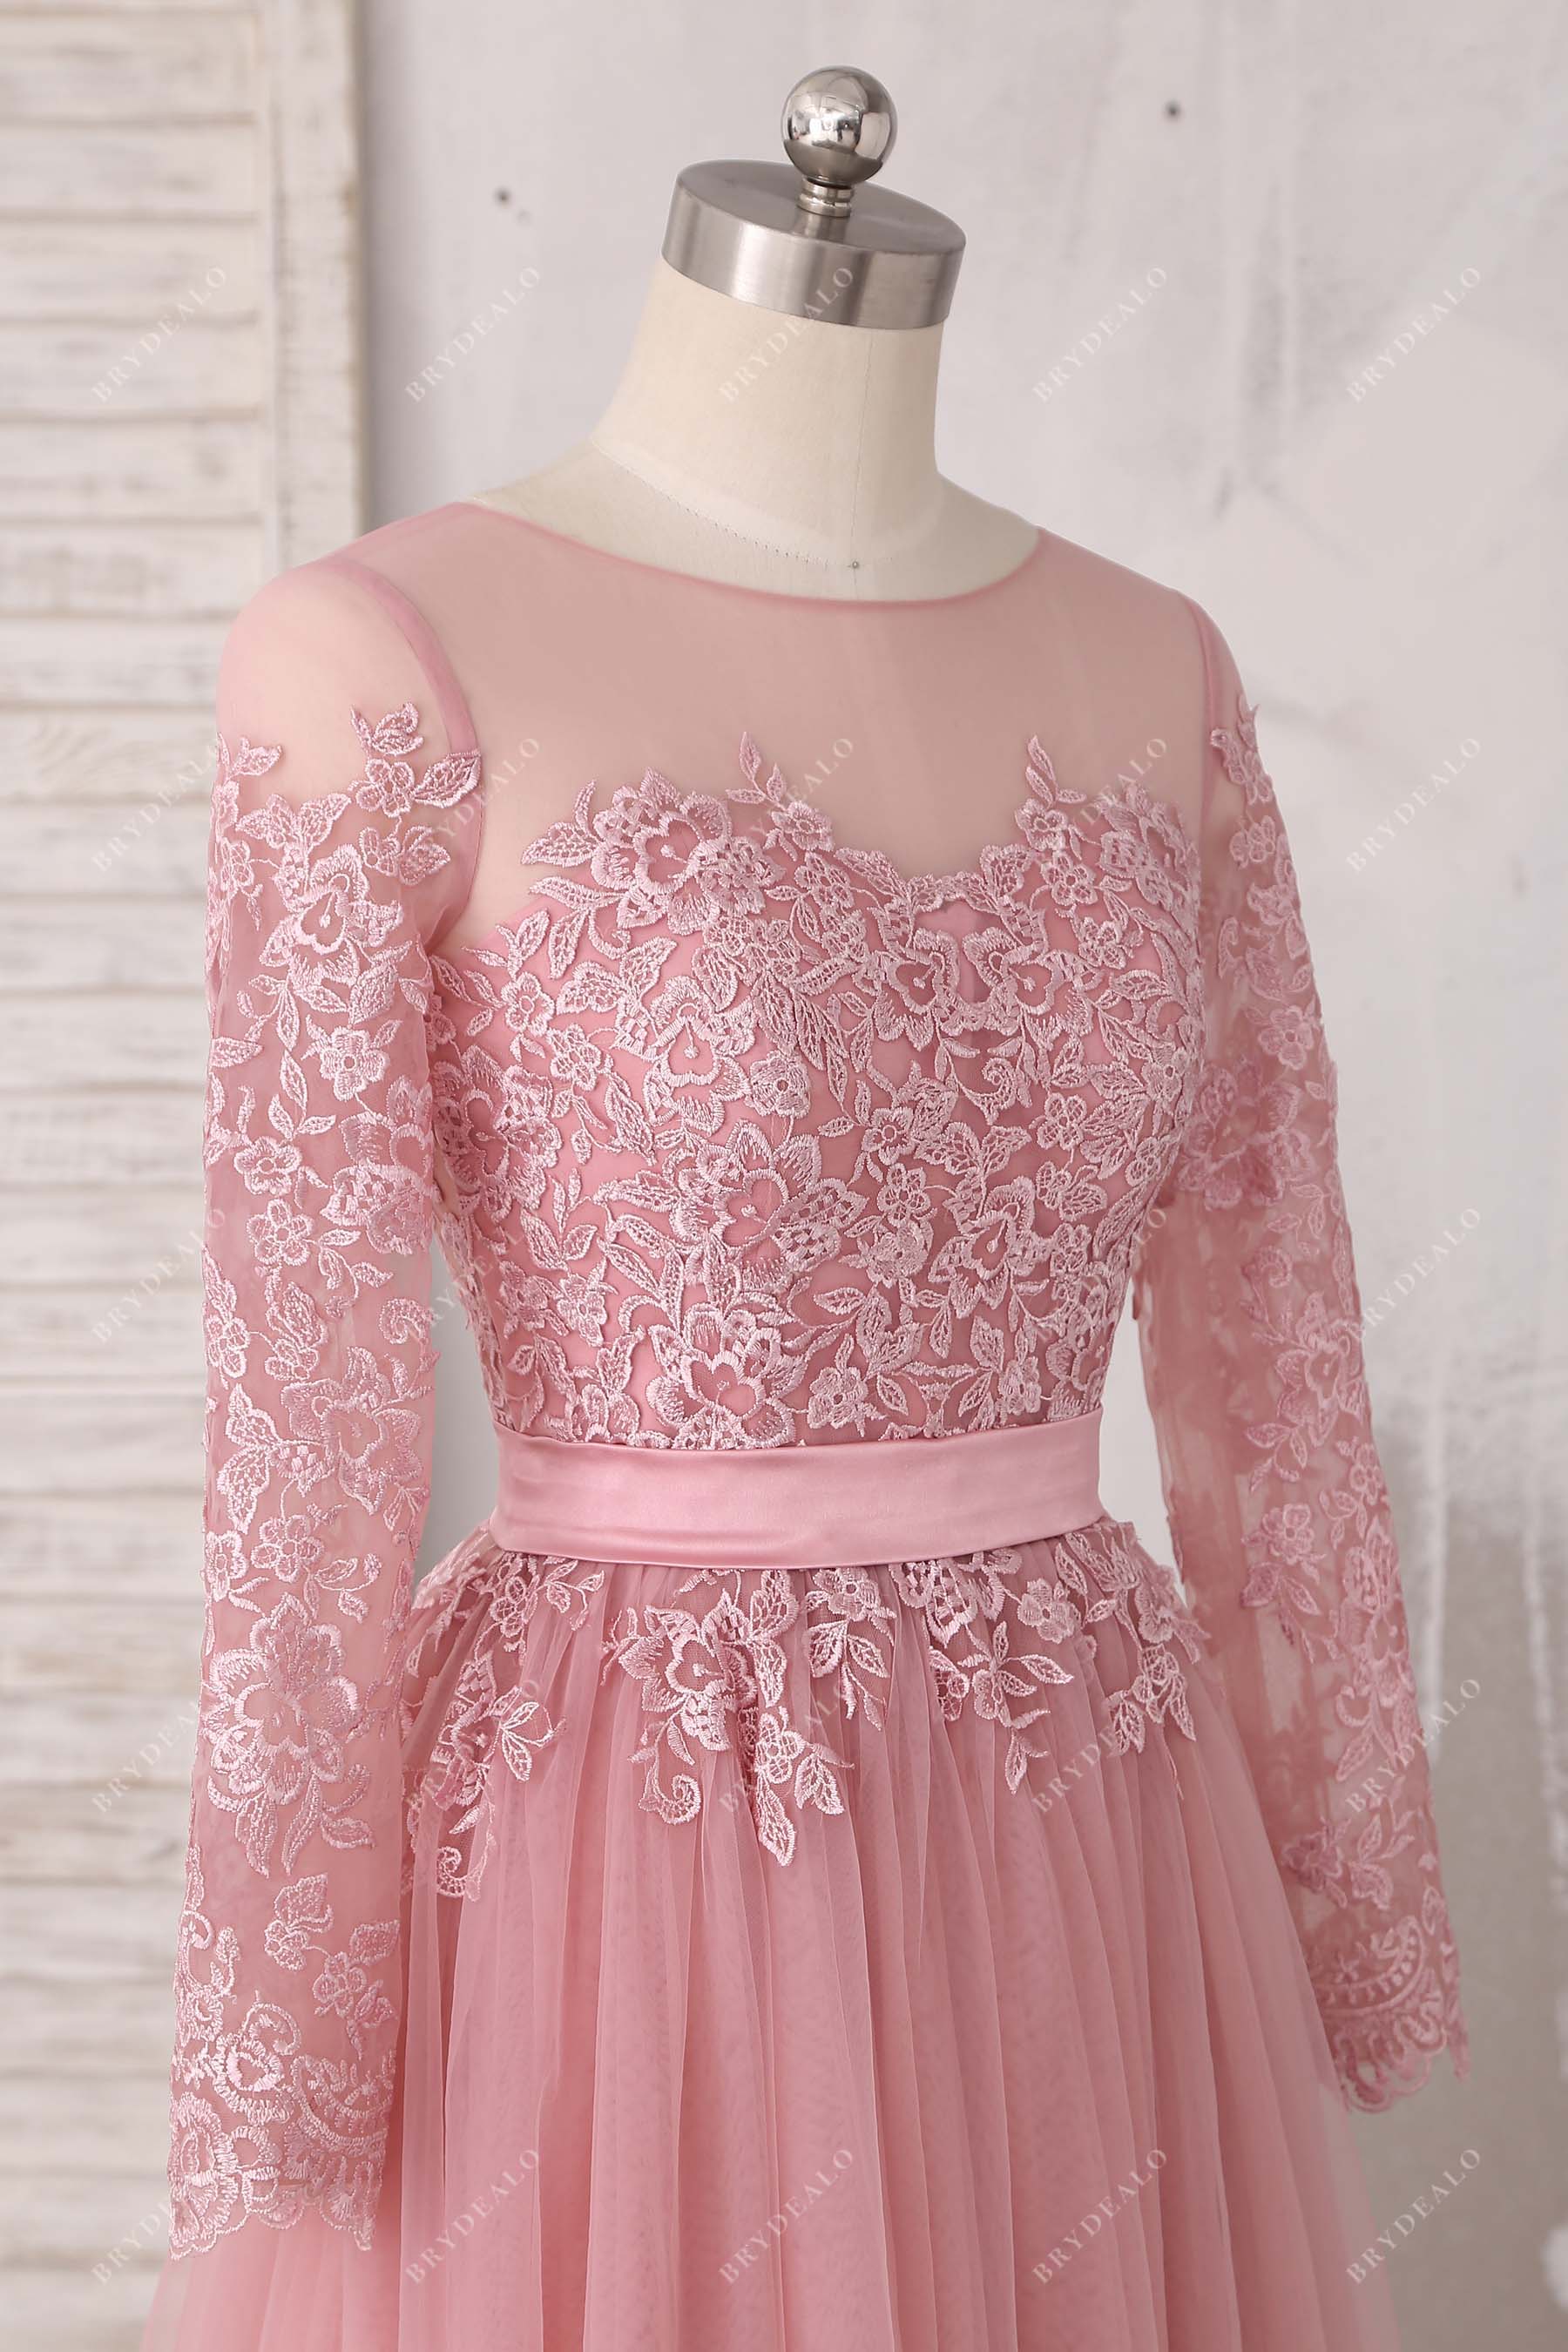 sheer sleeves lace gown